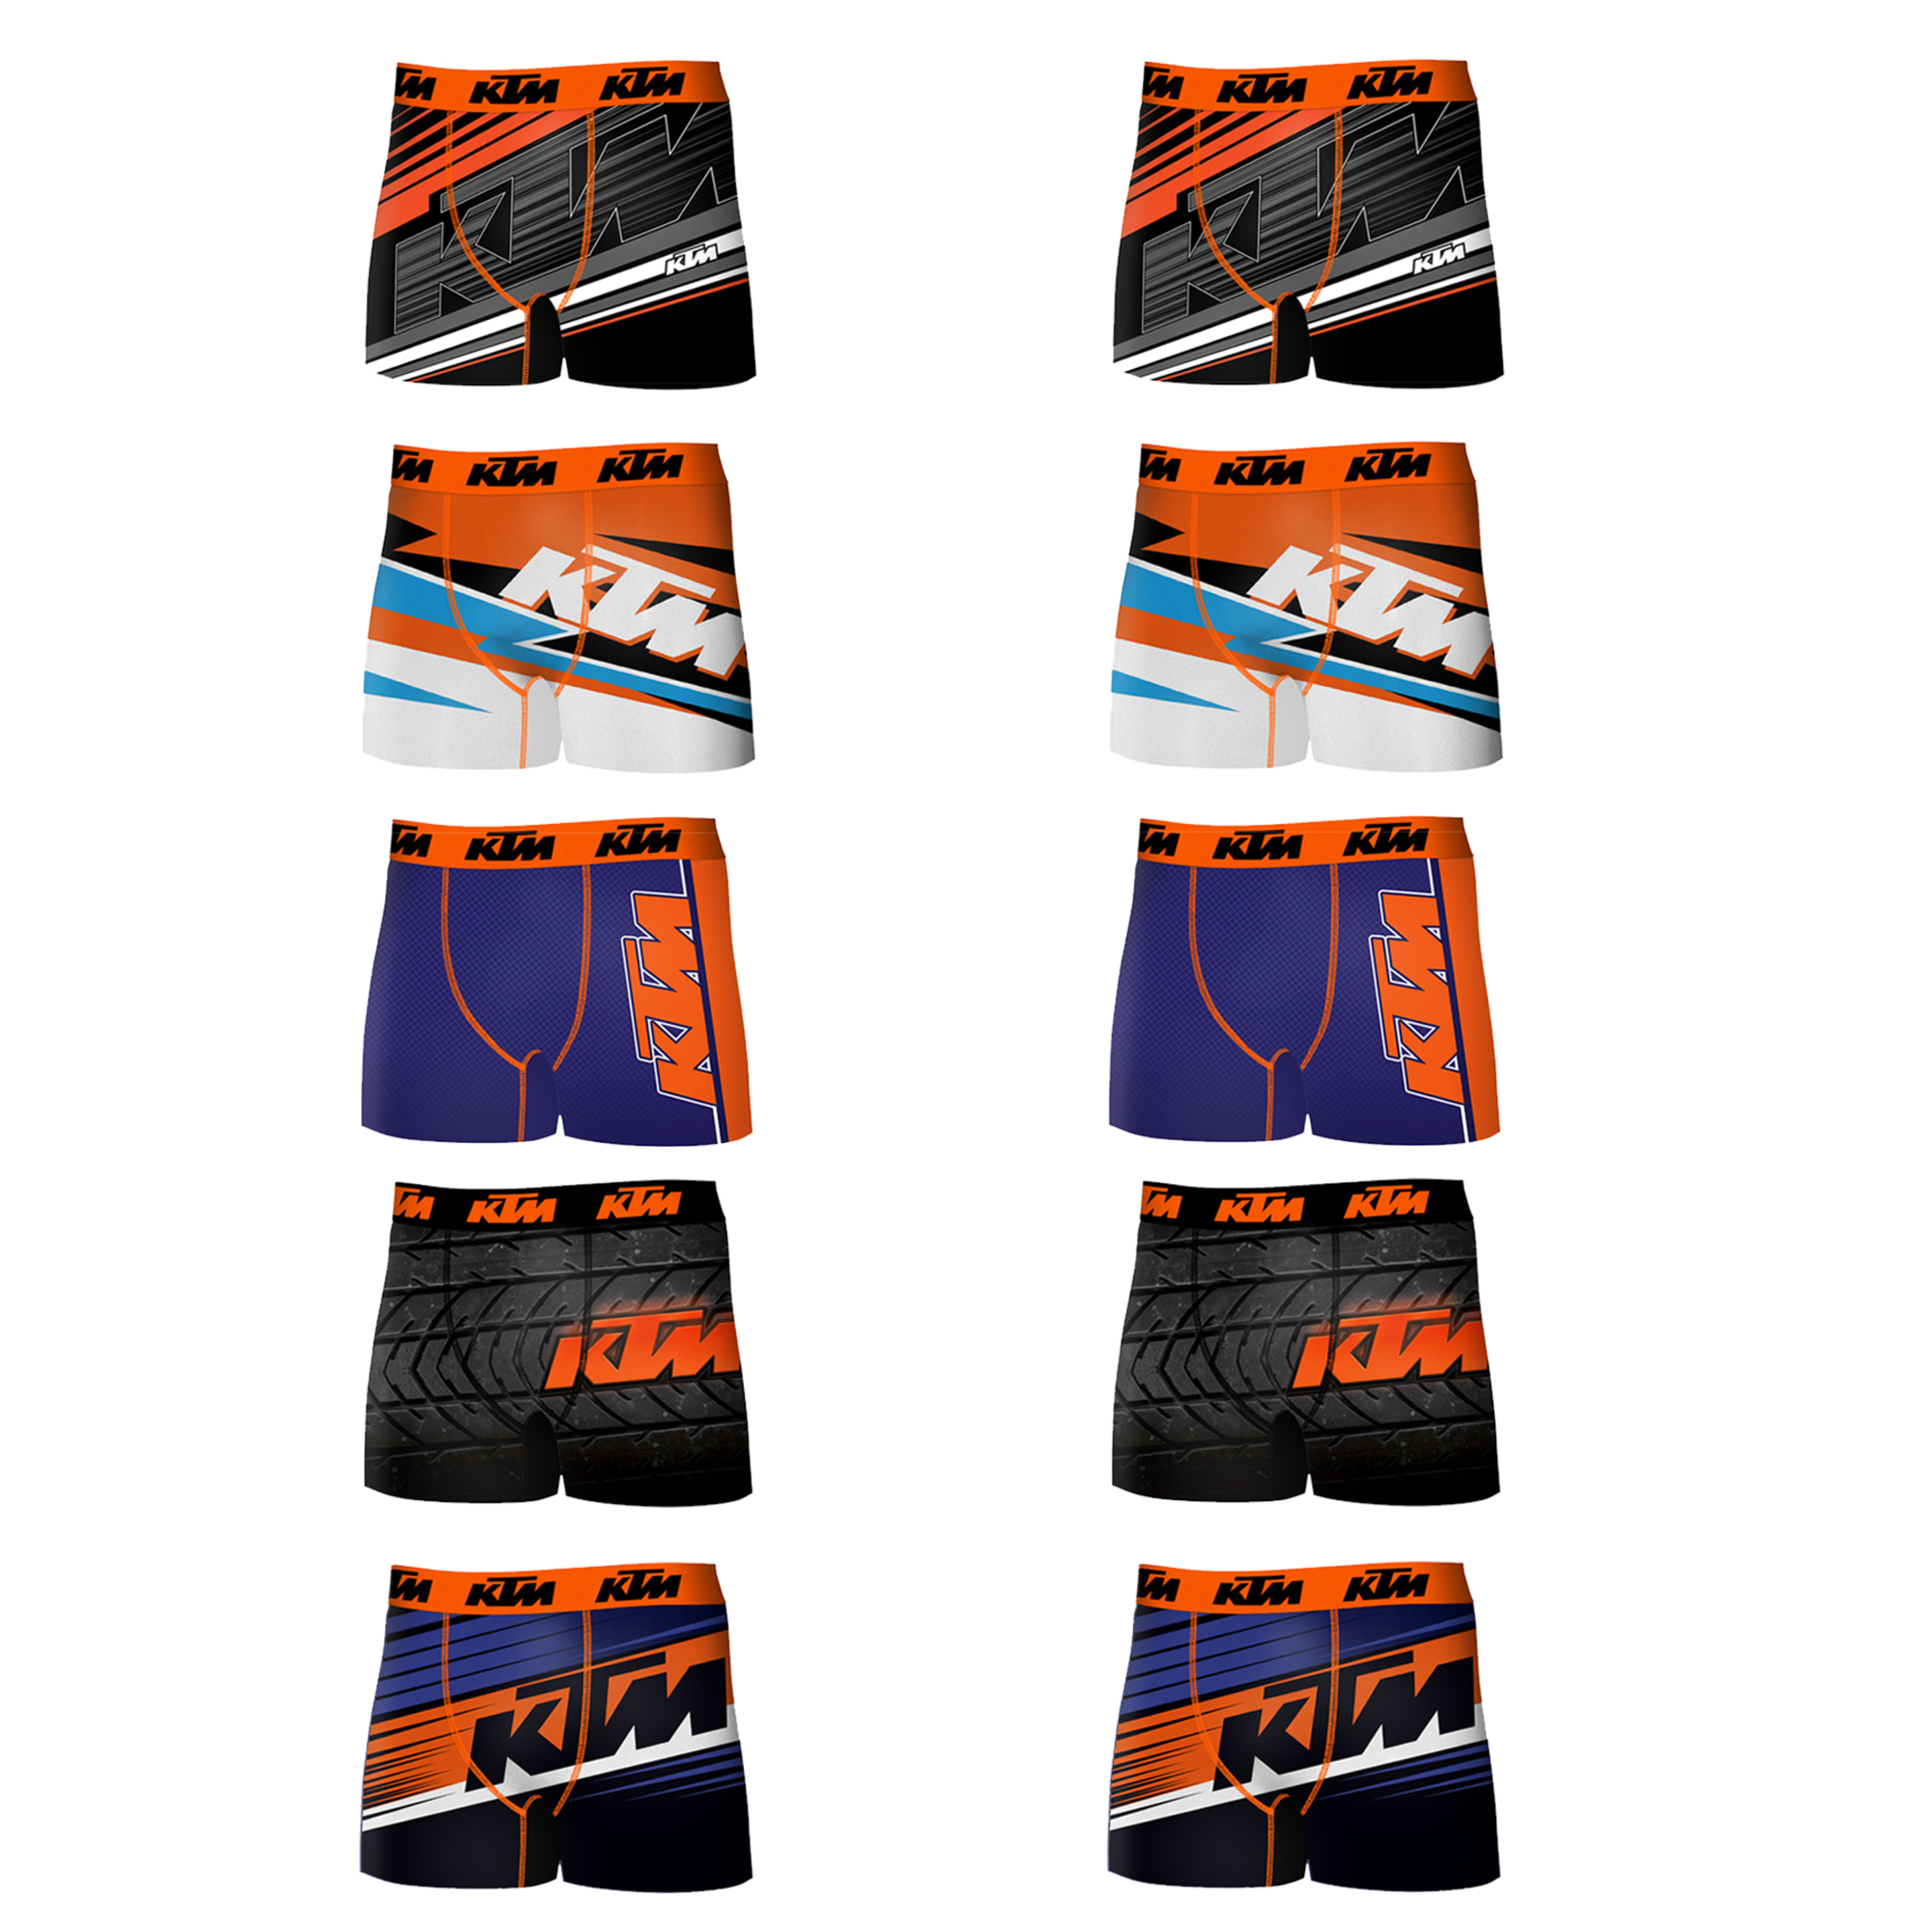 Pack 10 Calzoncillos Ktm - multicolor - 